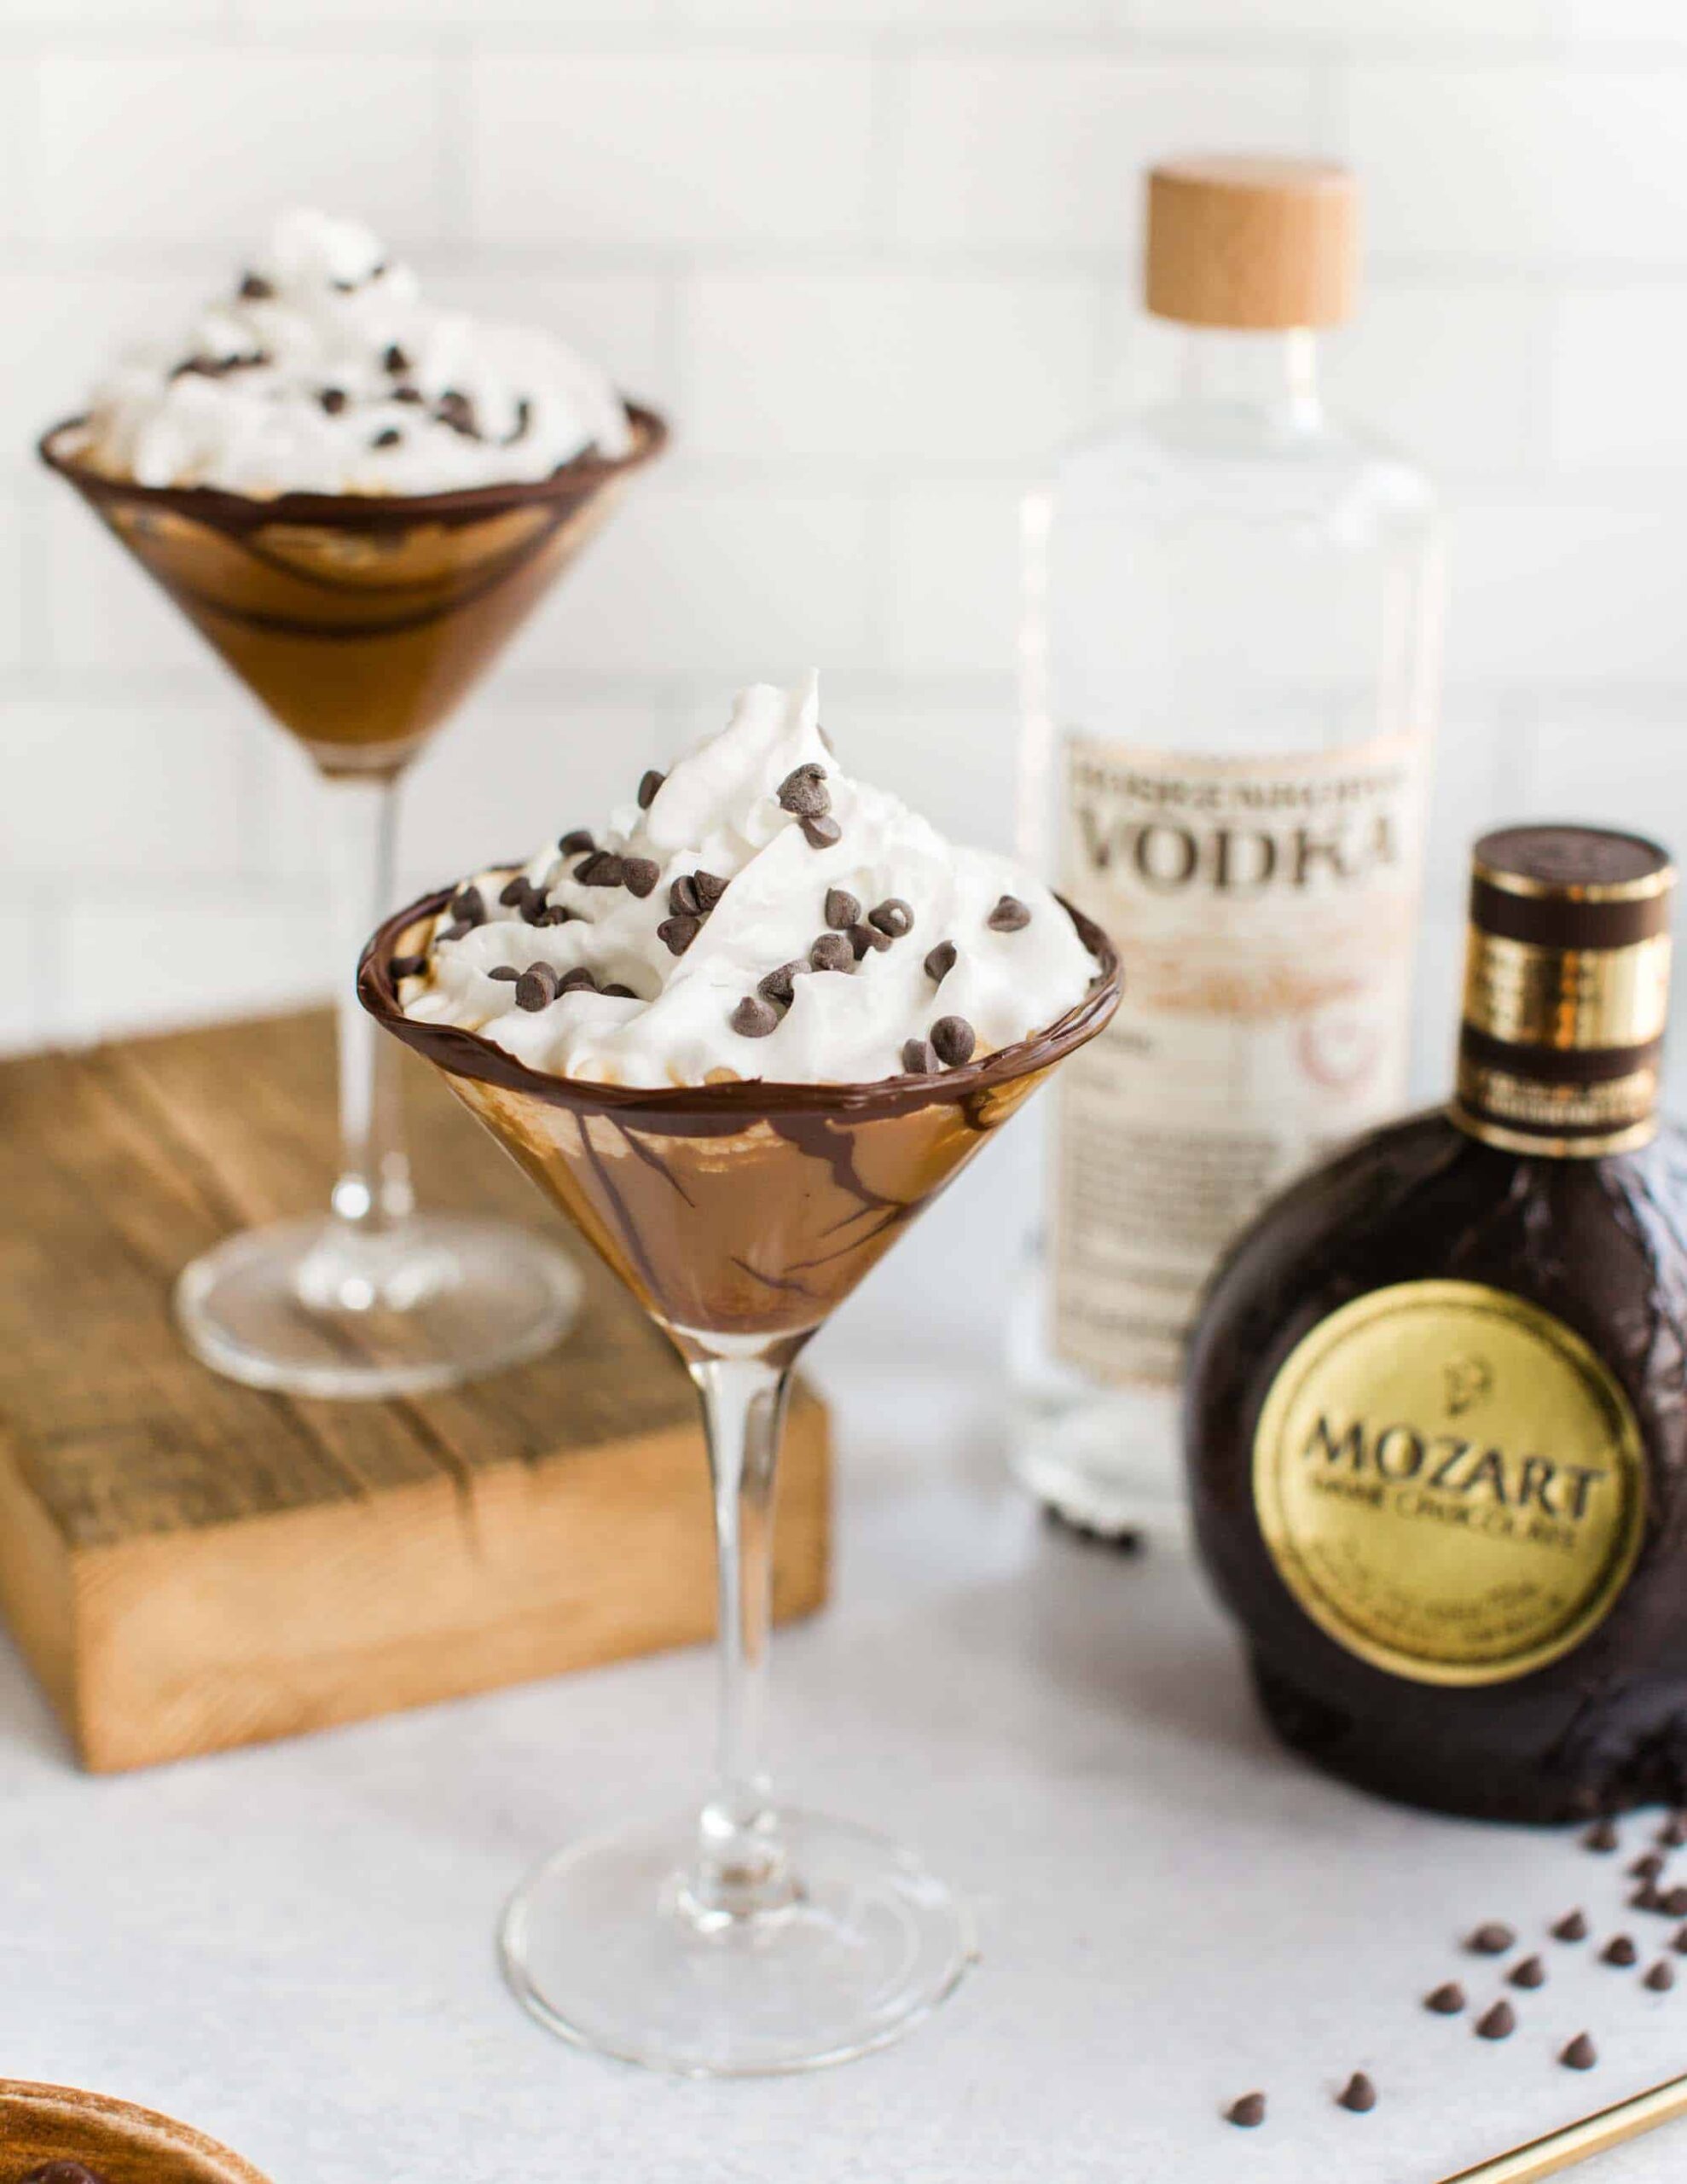 vegan chocolate martinis with vegan whipped cream and chocolate chips alongside Mozart liqueur